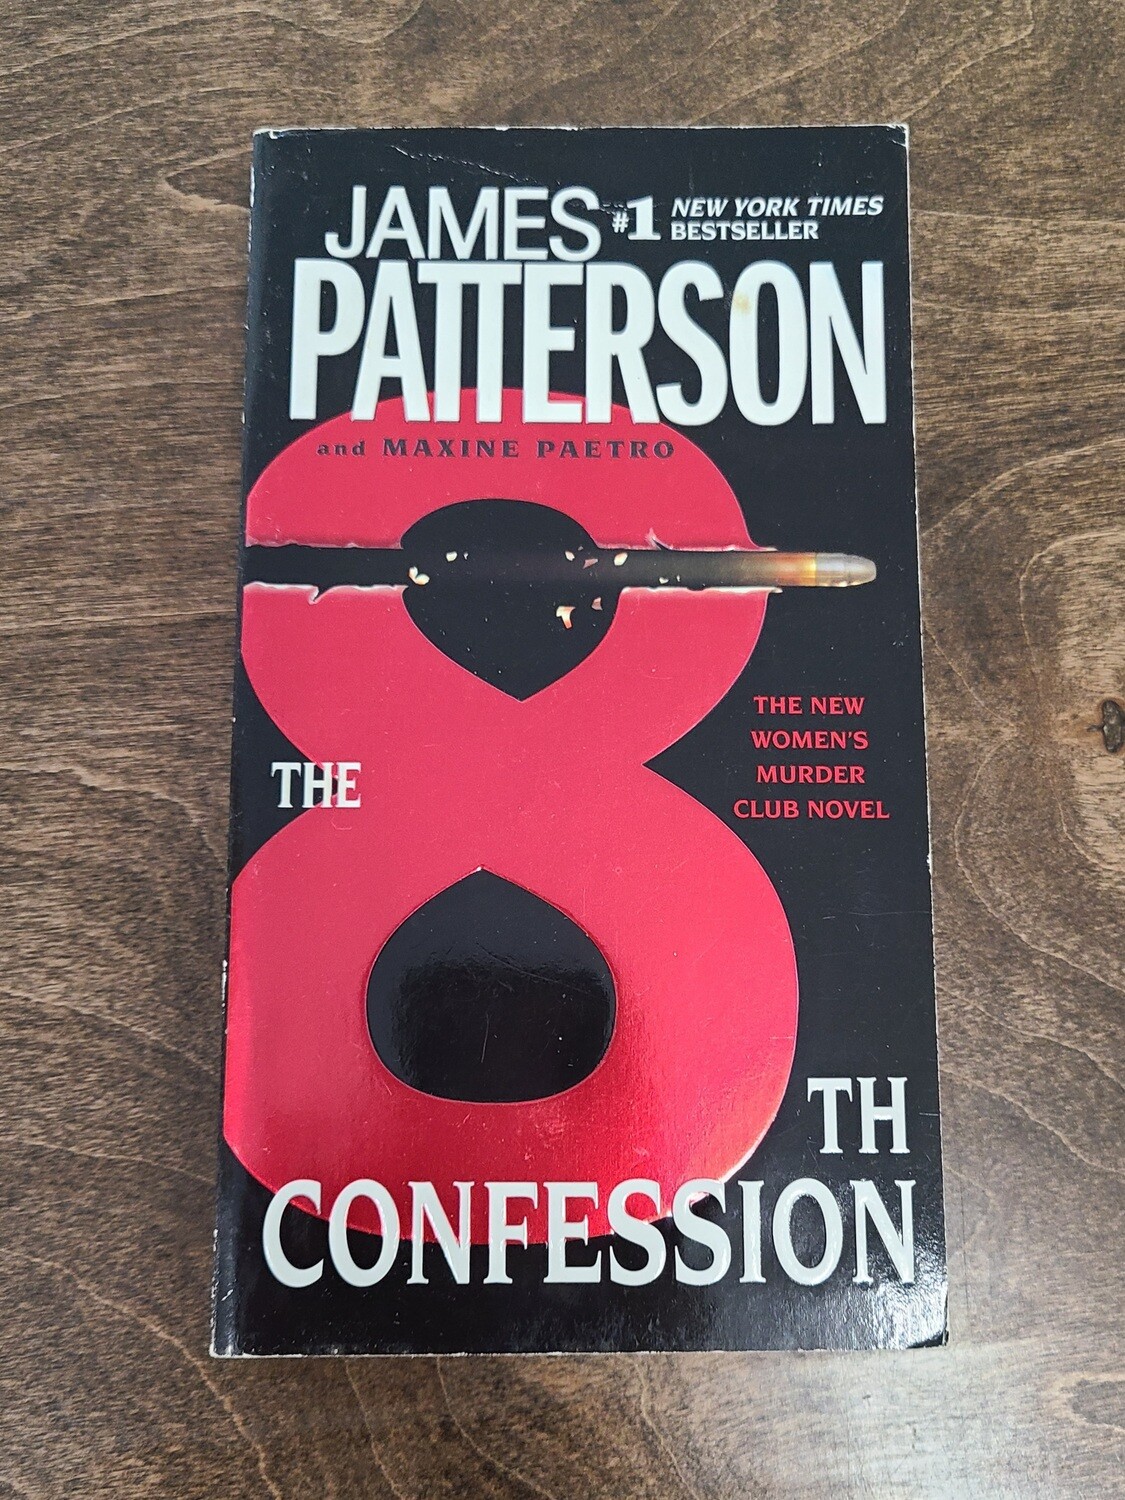 The 8th Confession by James Patterson and Maxine Paetro - Paperback